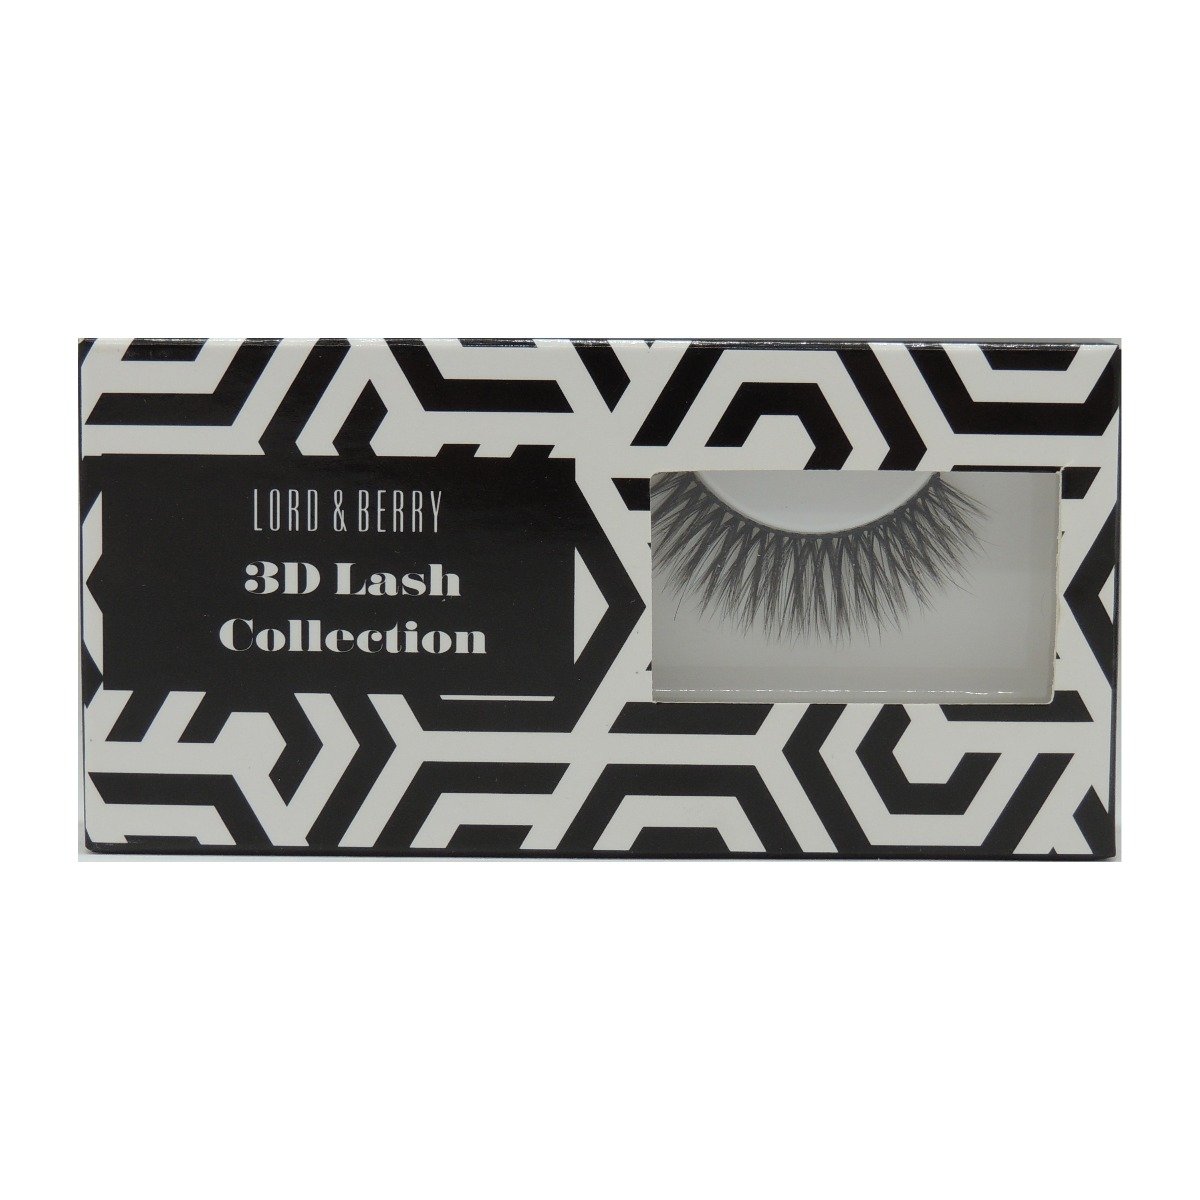 Lord & Berry 3D Lash Collection Eyelashes El 35 - Bloom Pharmacy